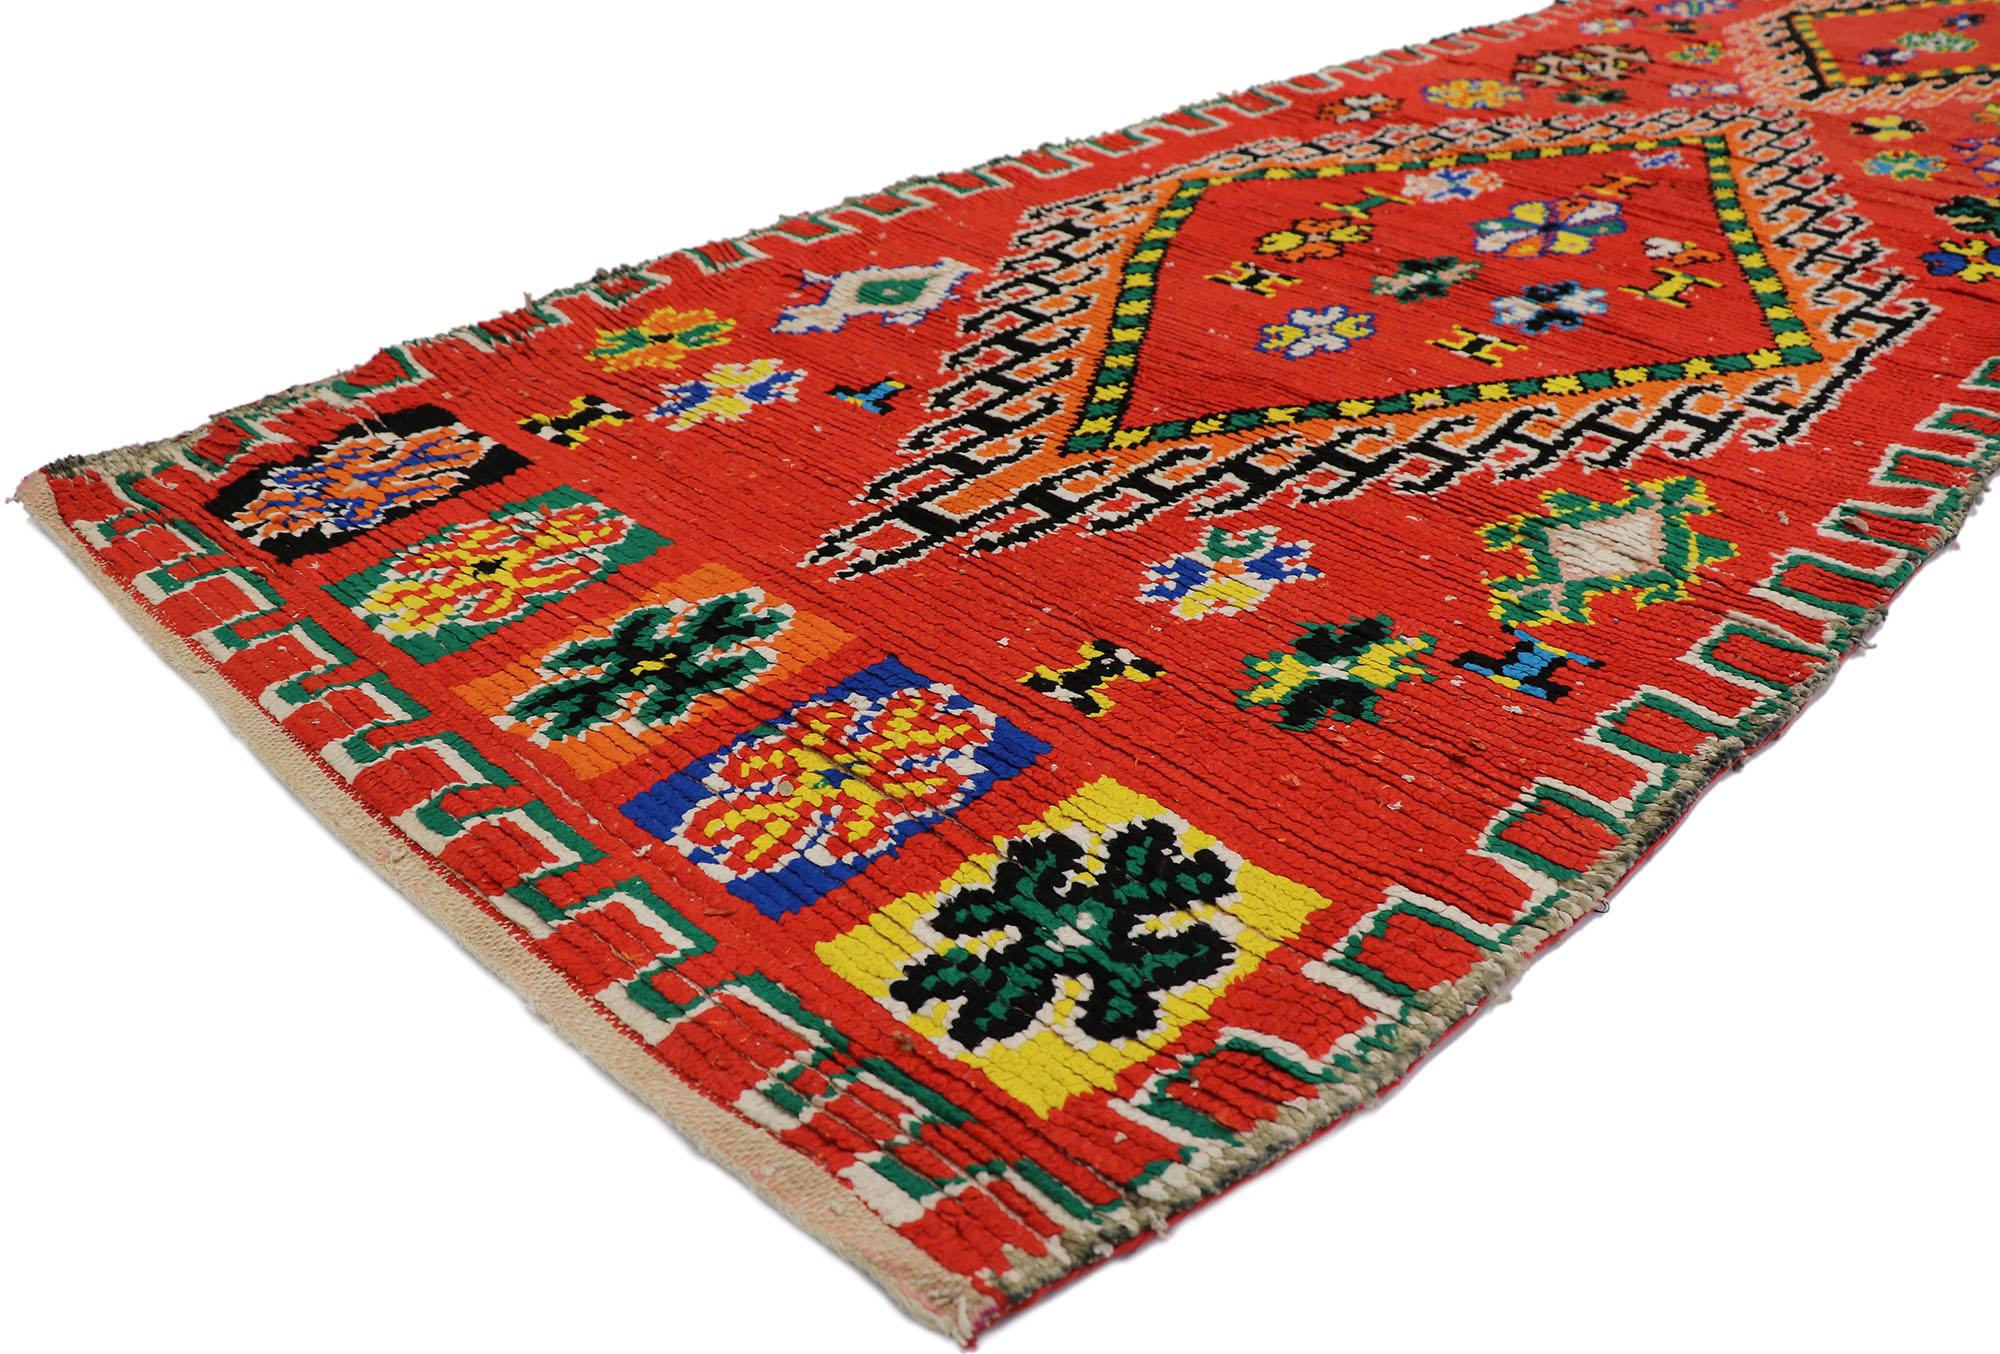 21674 Vintage Berber Red Moroccan Runner with Tribal Style 03'06 x 10'07. Showcasing a bold expressive design, incredible detail and texture, this hand knotted wool vintage Berber red Moroccan runner is a captivating vision of woven beauty. The